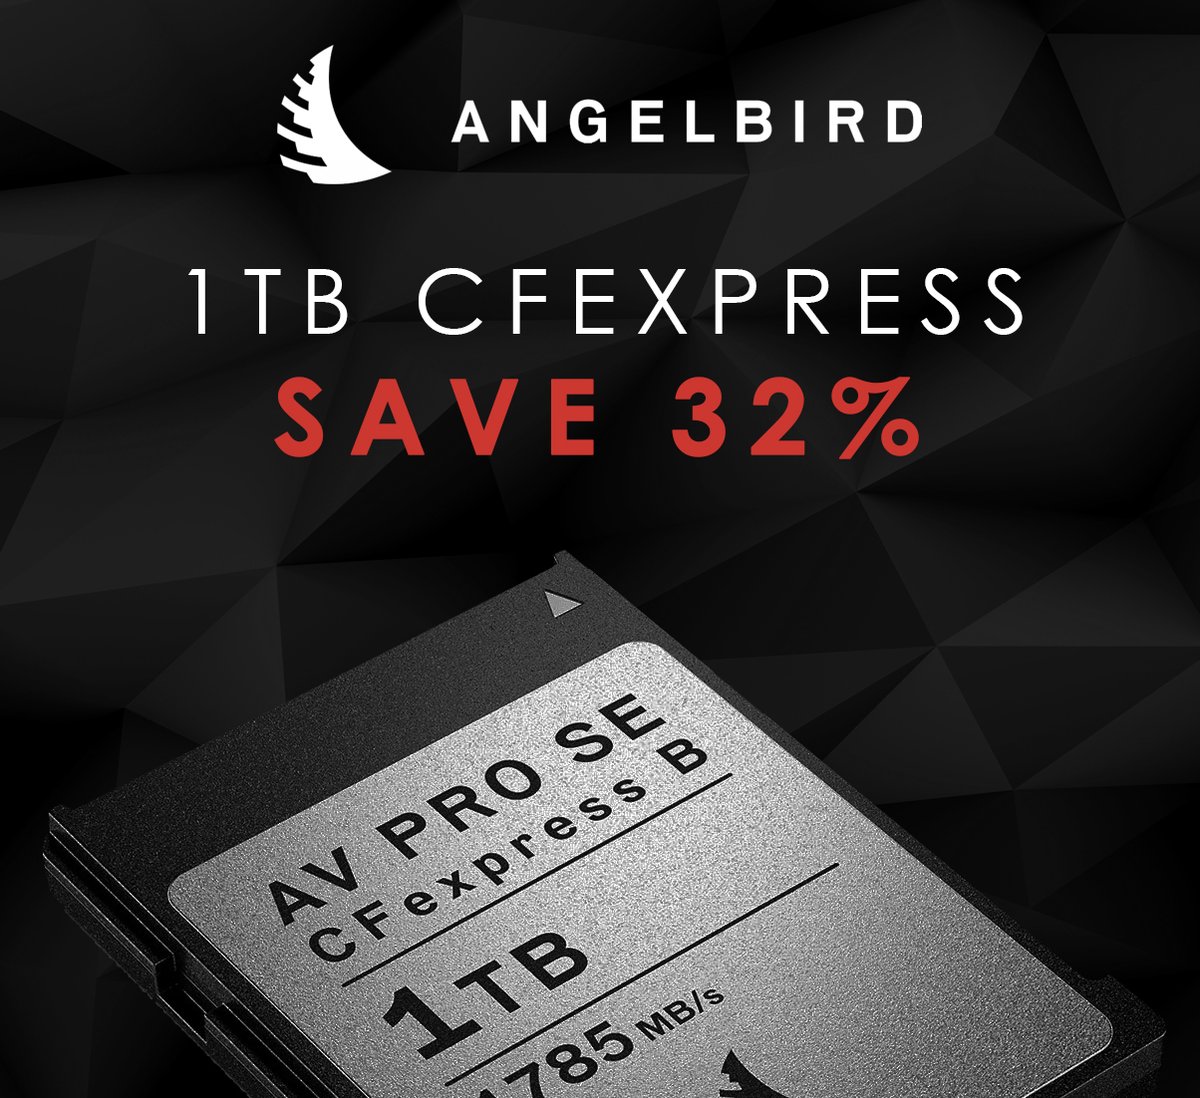 💥 Save 32% on the Angelbird 1TB CFexpress card! 💥 View deal on our website: bit.ly/3N12wnZ